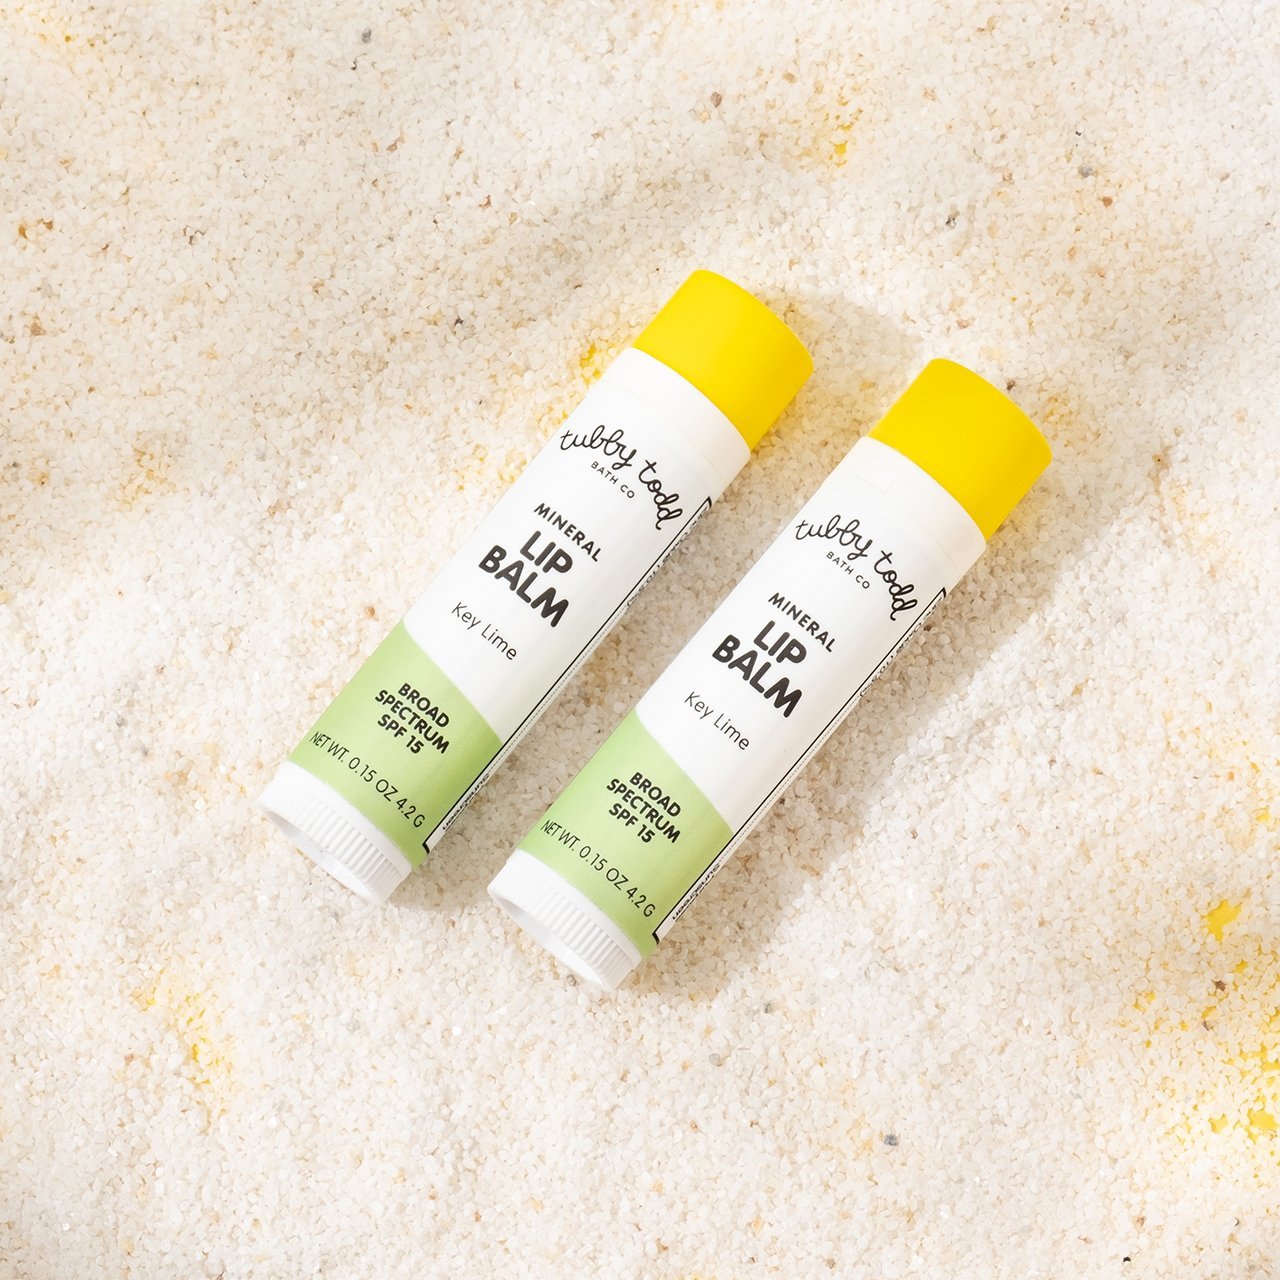 New Mineral Lip Balm Key Lime 2 sets on the sands